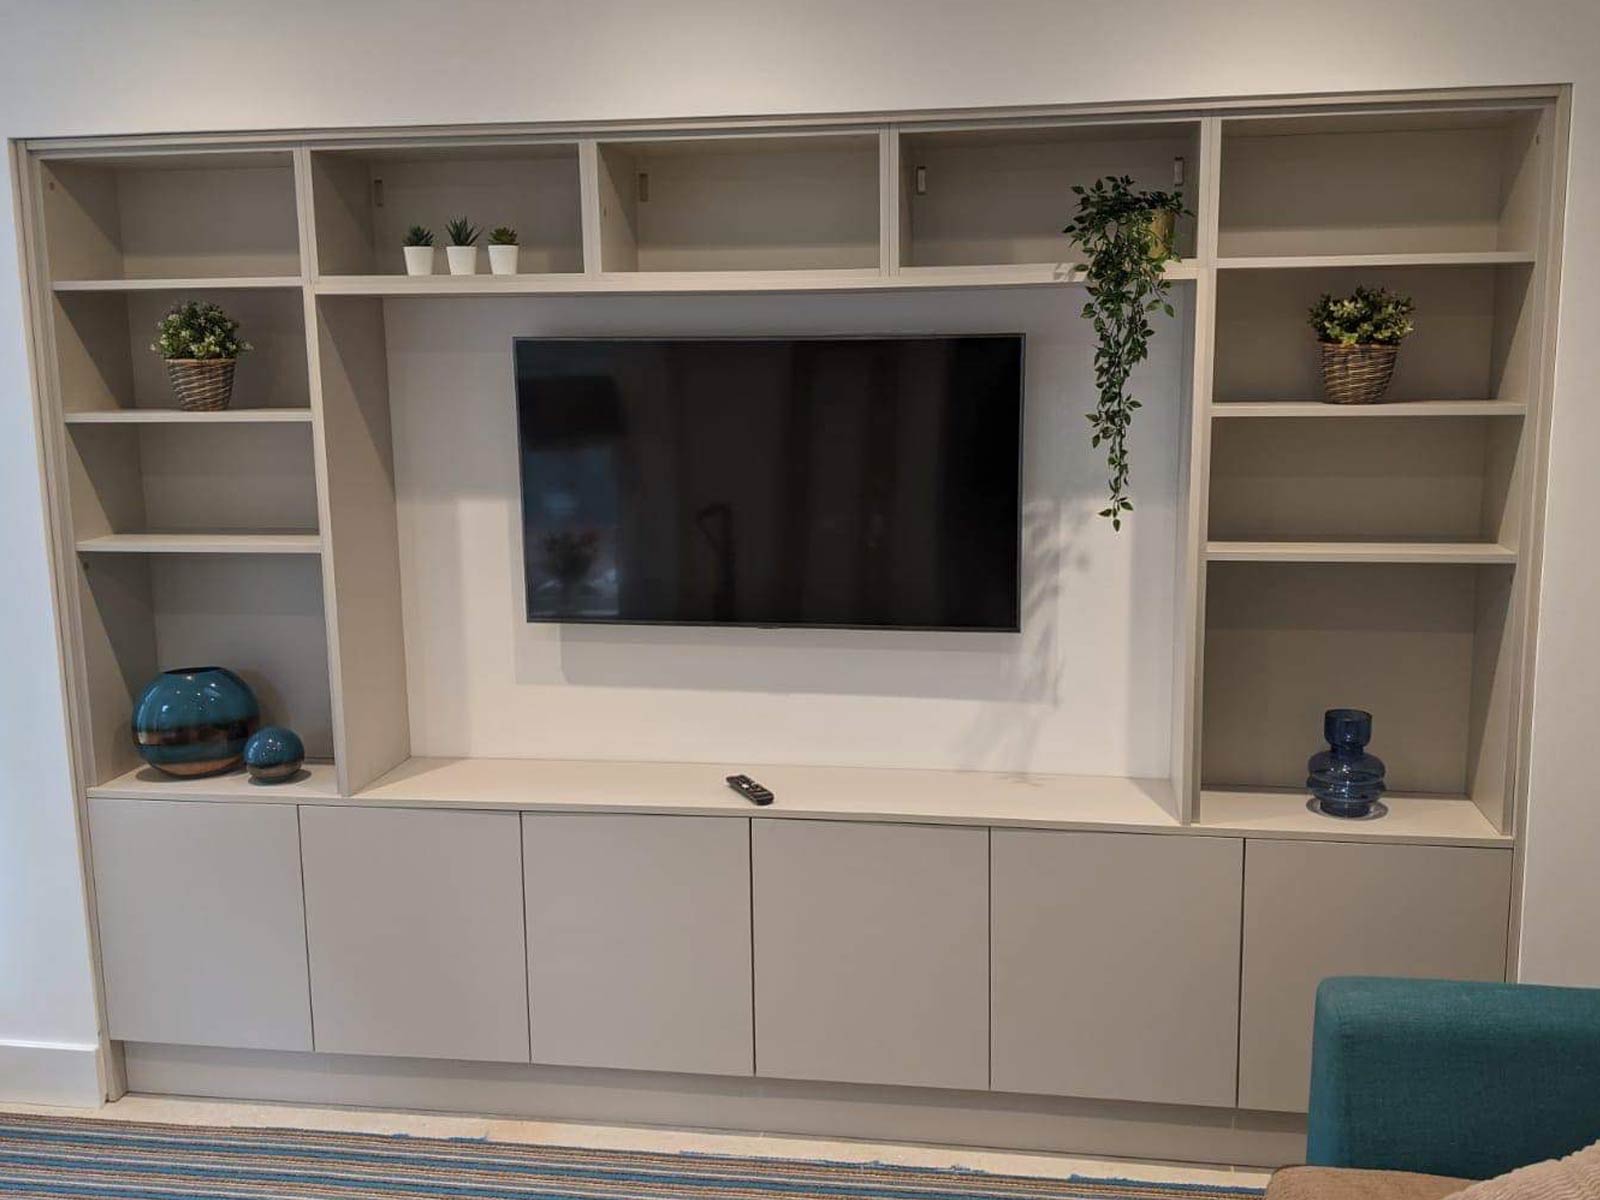 Media wall with shelves used as a kitchen space-saving solution